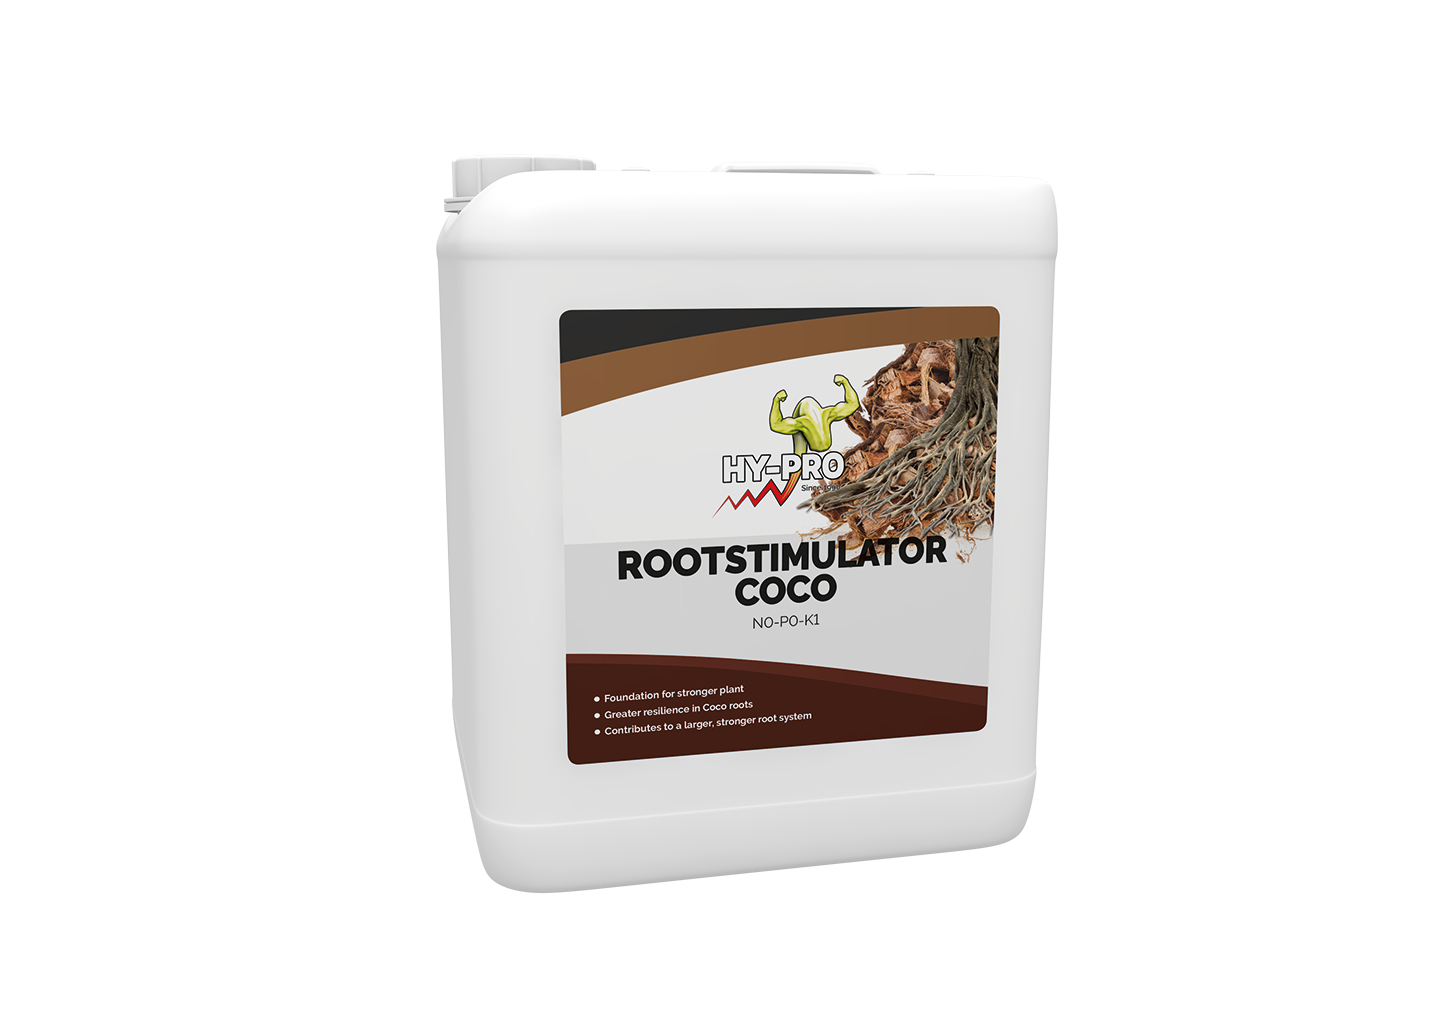 https://www.hy-pro.nl/product/hy-pro-coco-rootstimulator-5liter